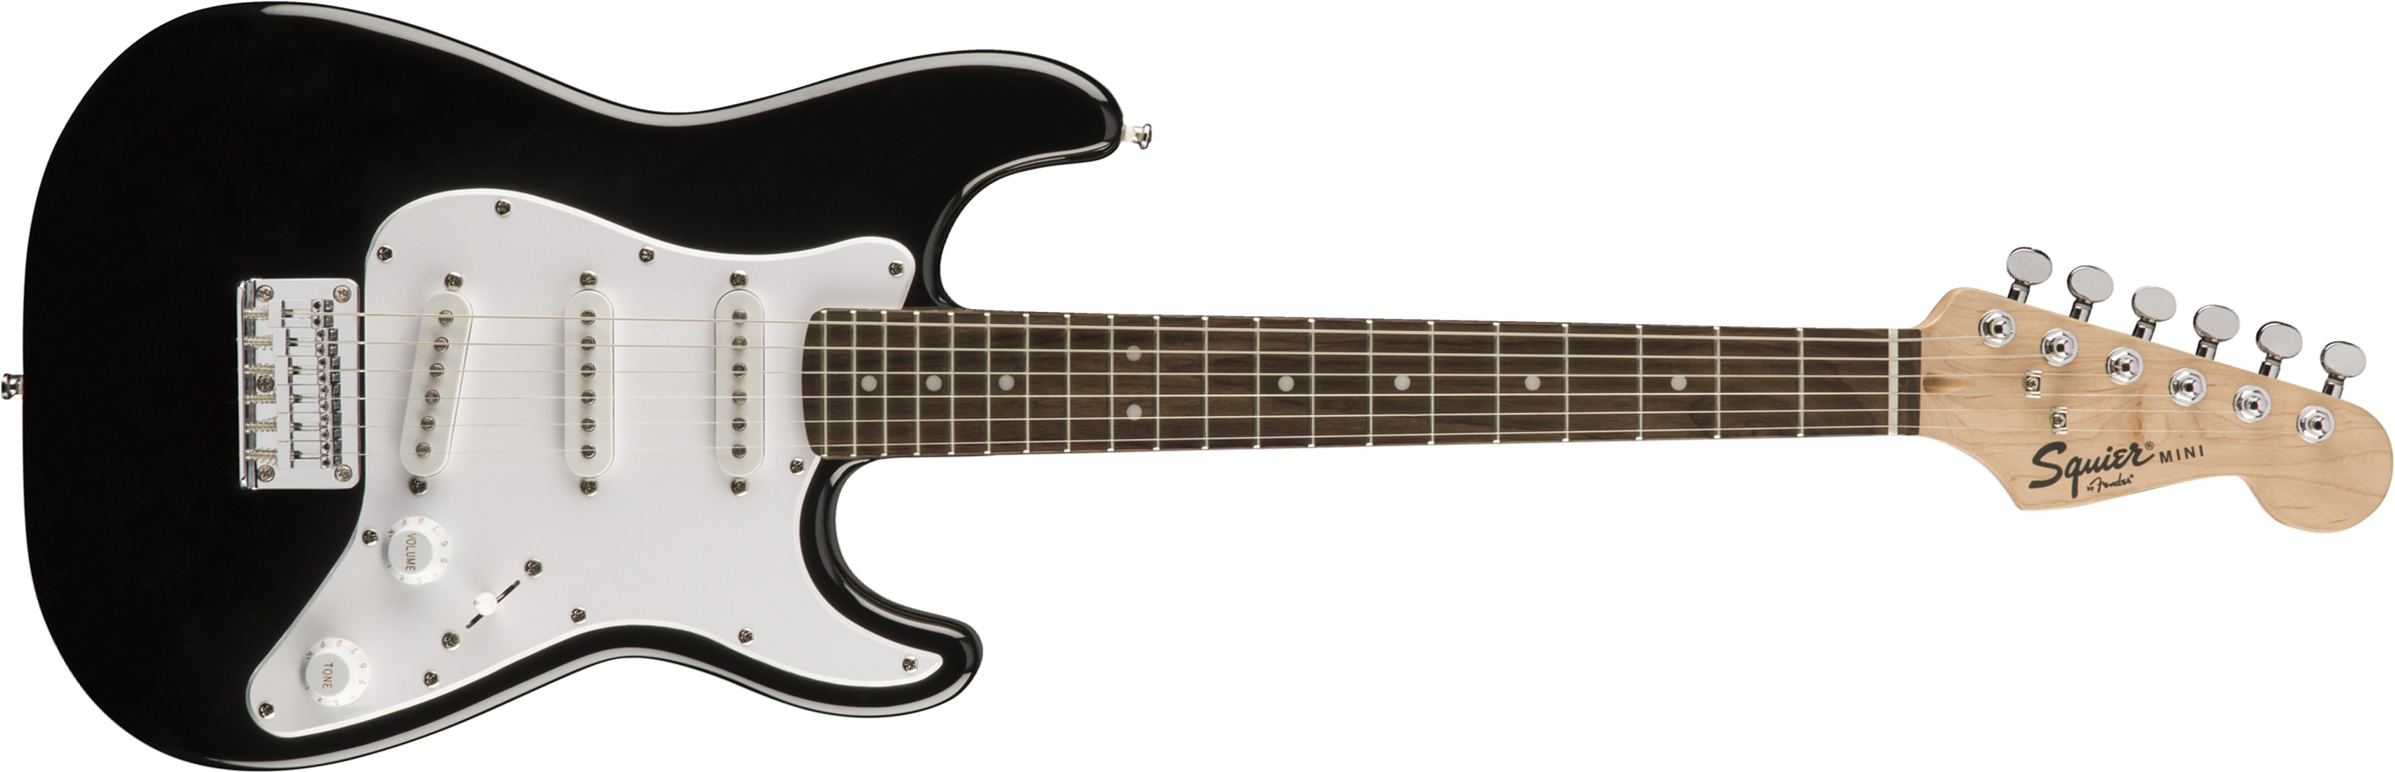 Squier Strat Mini V2 Sss Ht Rw - Black - Electric guitar for kids - Main picture